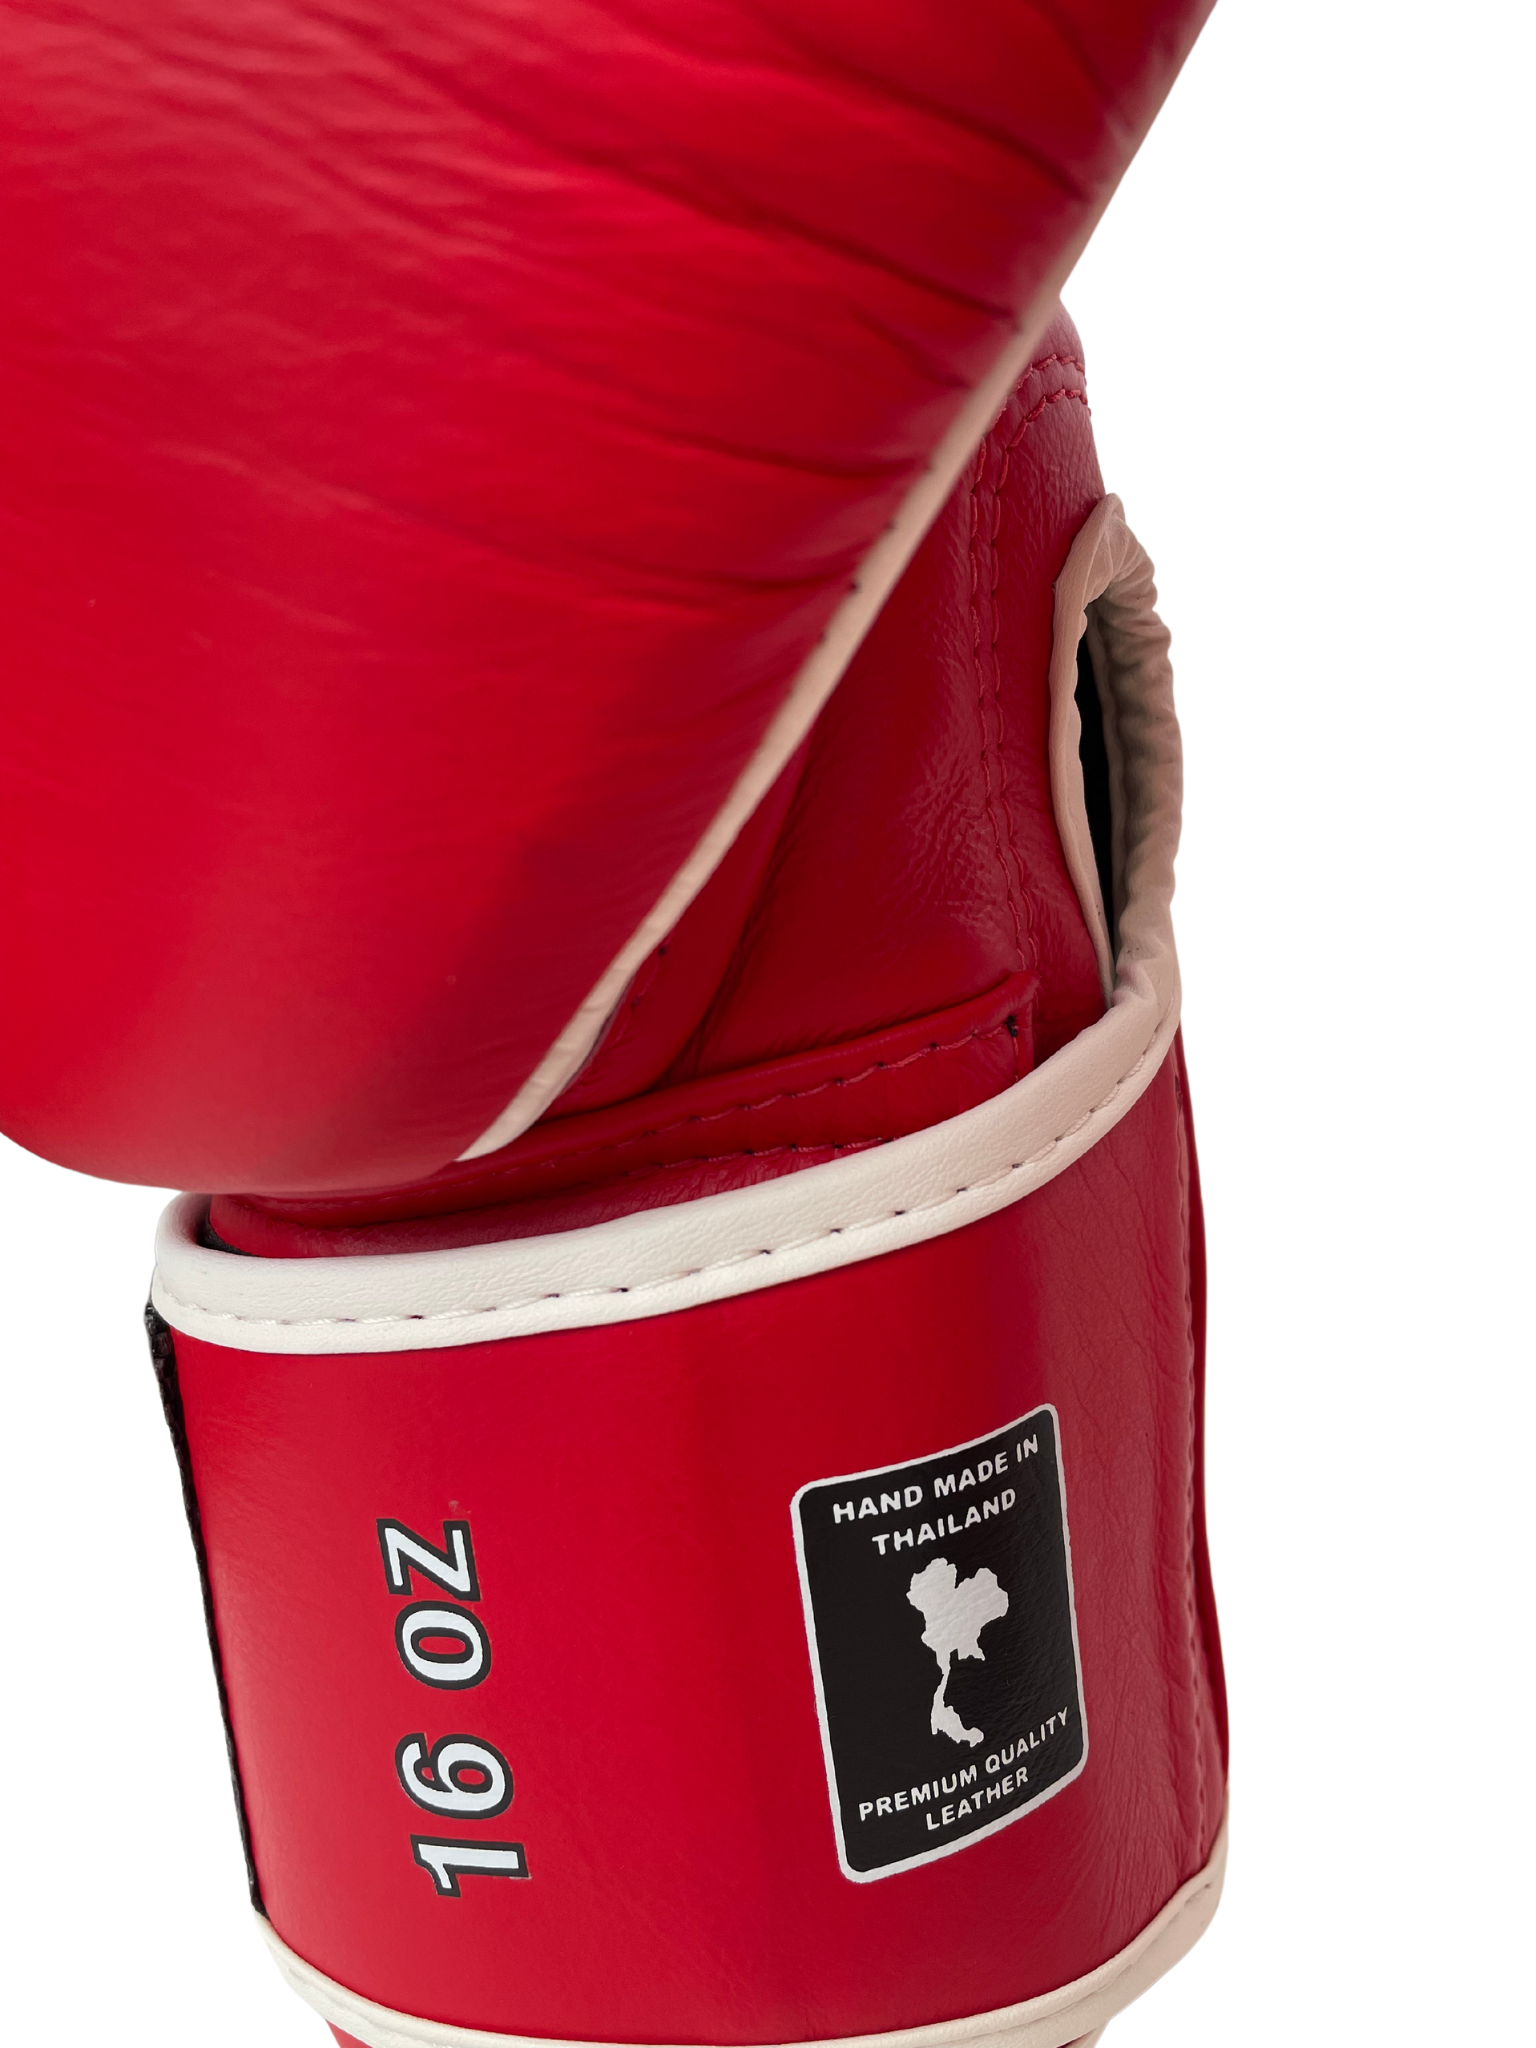 BOXING GLOVES - Siam™ - LEATHER - RED - 16OZ